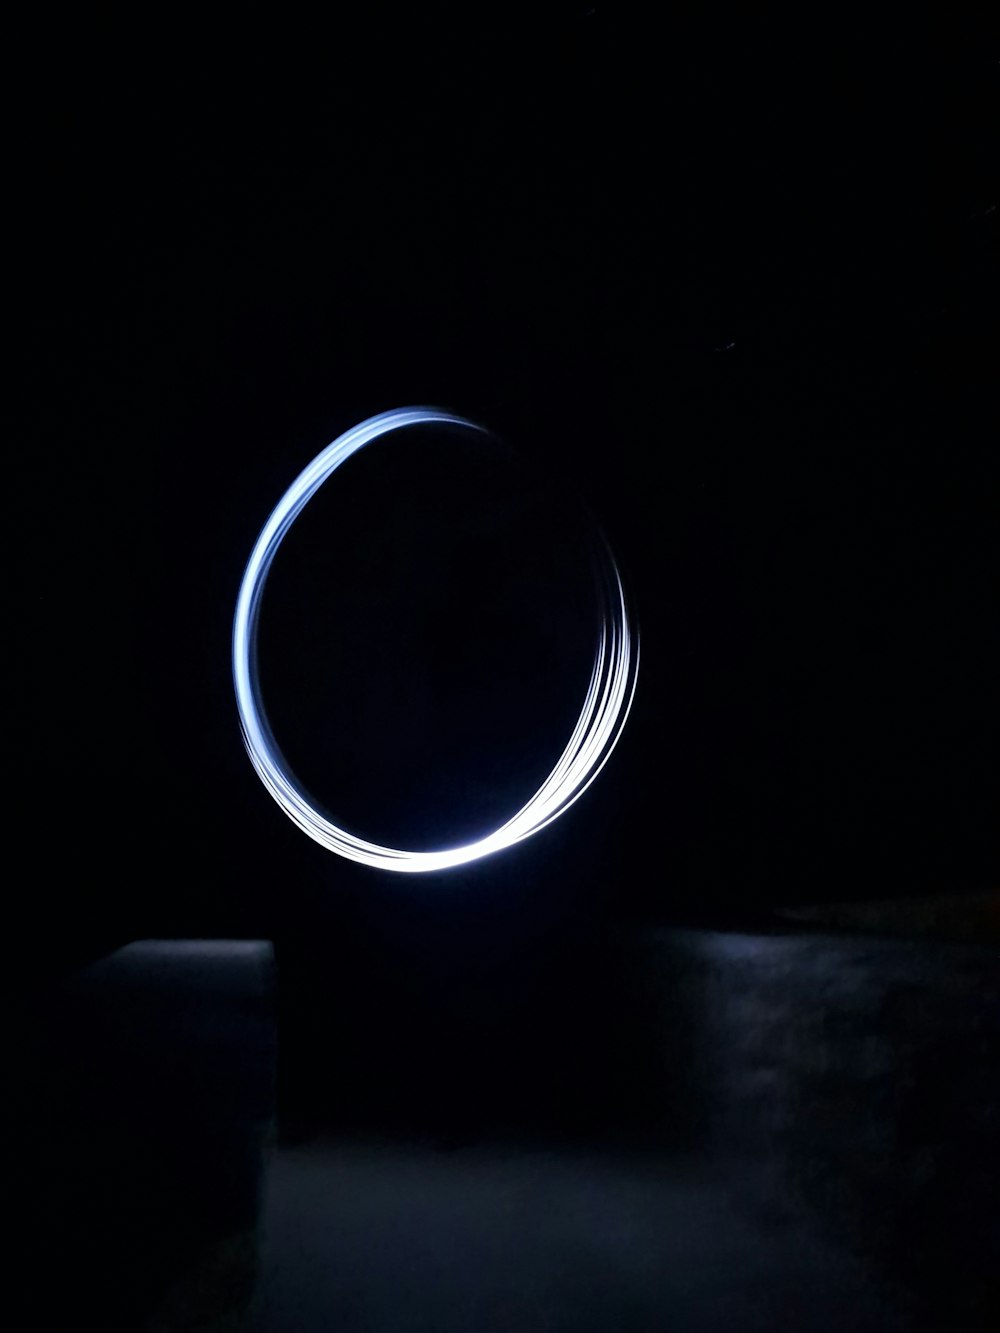 a circular object is shown in the dark